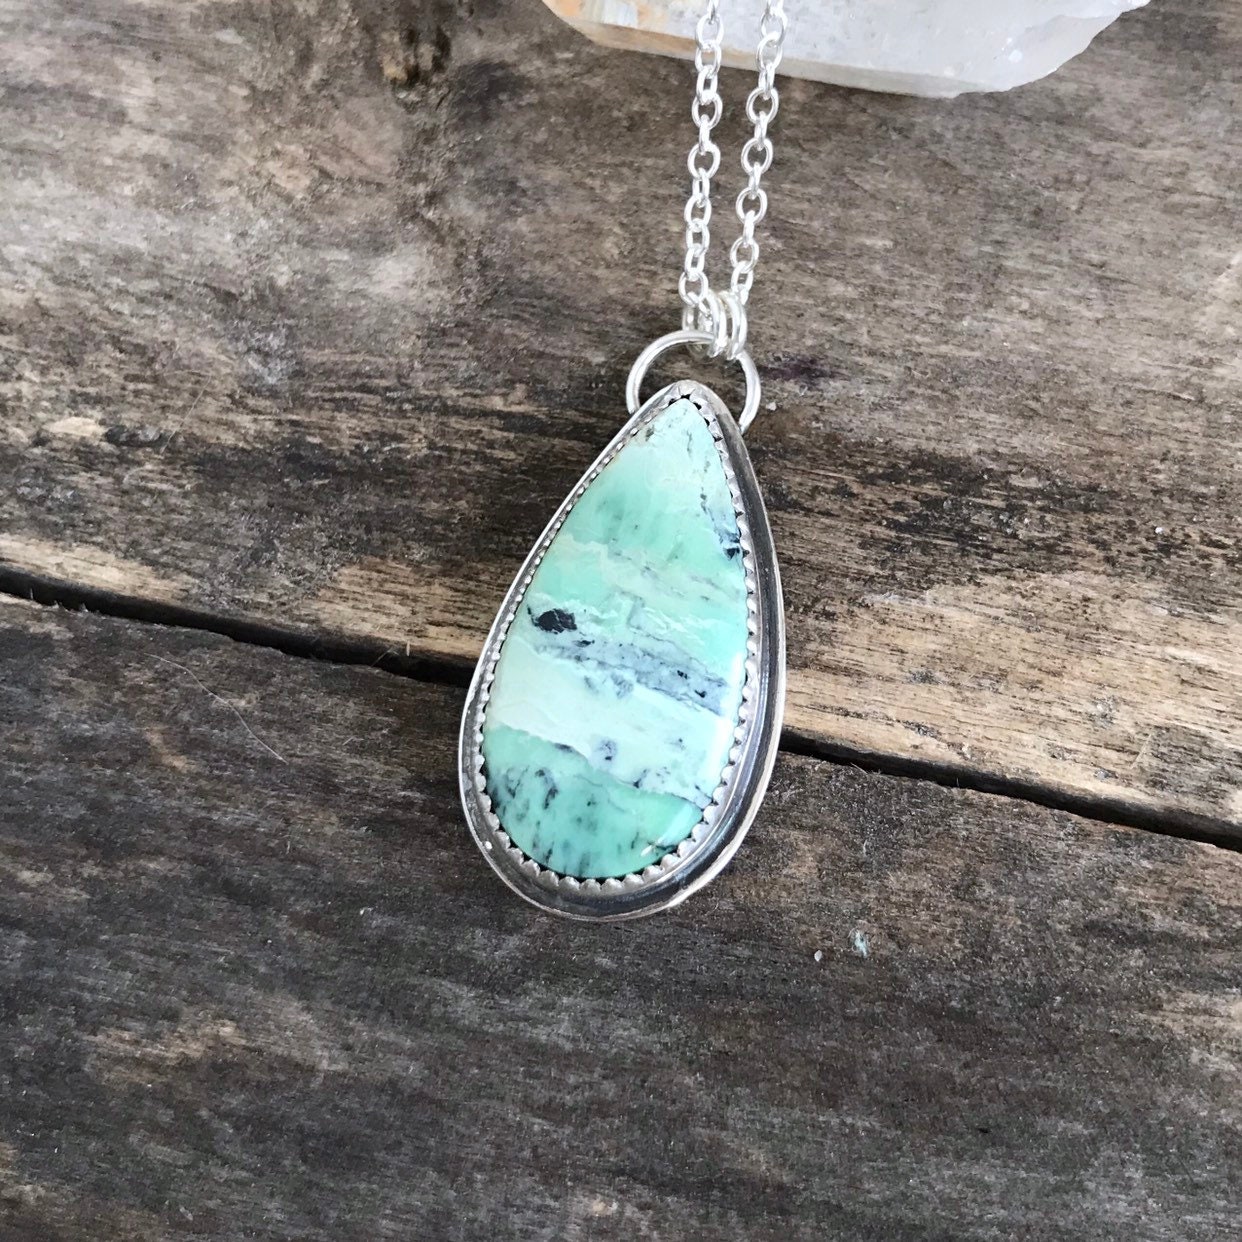 Turquoise Necklace New Lander Necklace Sterling Silver | Etsy